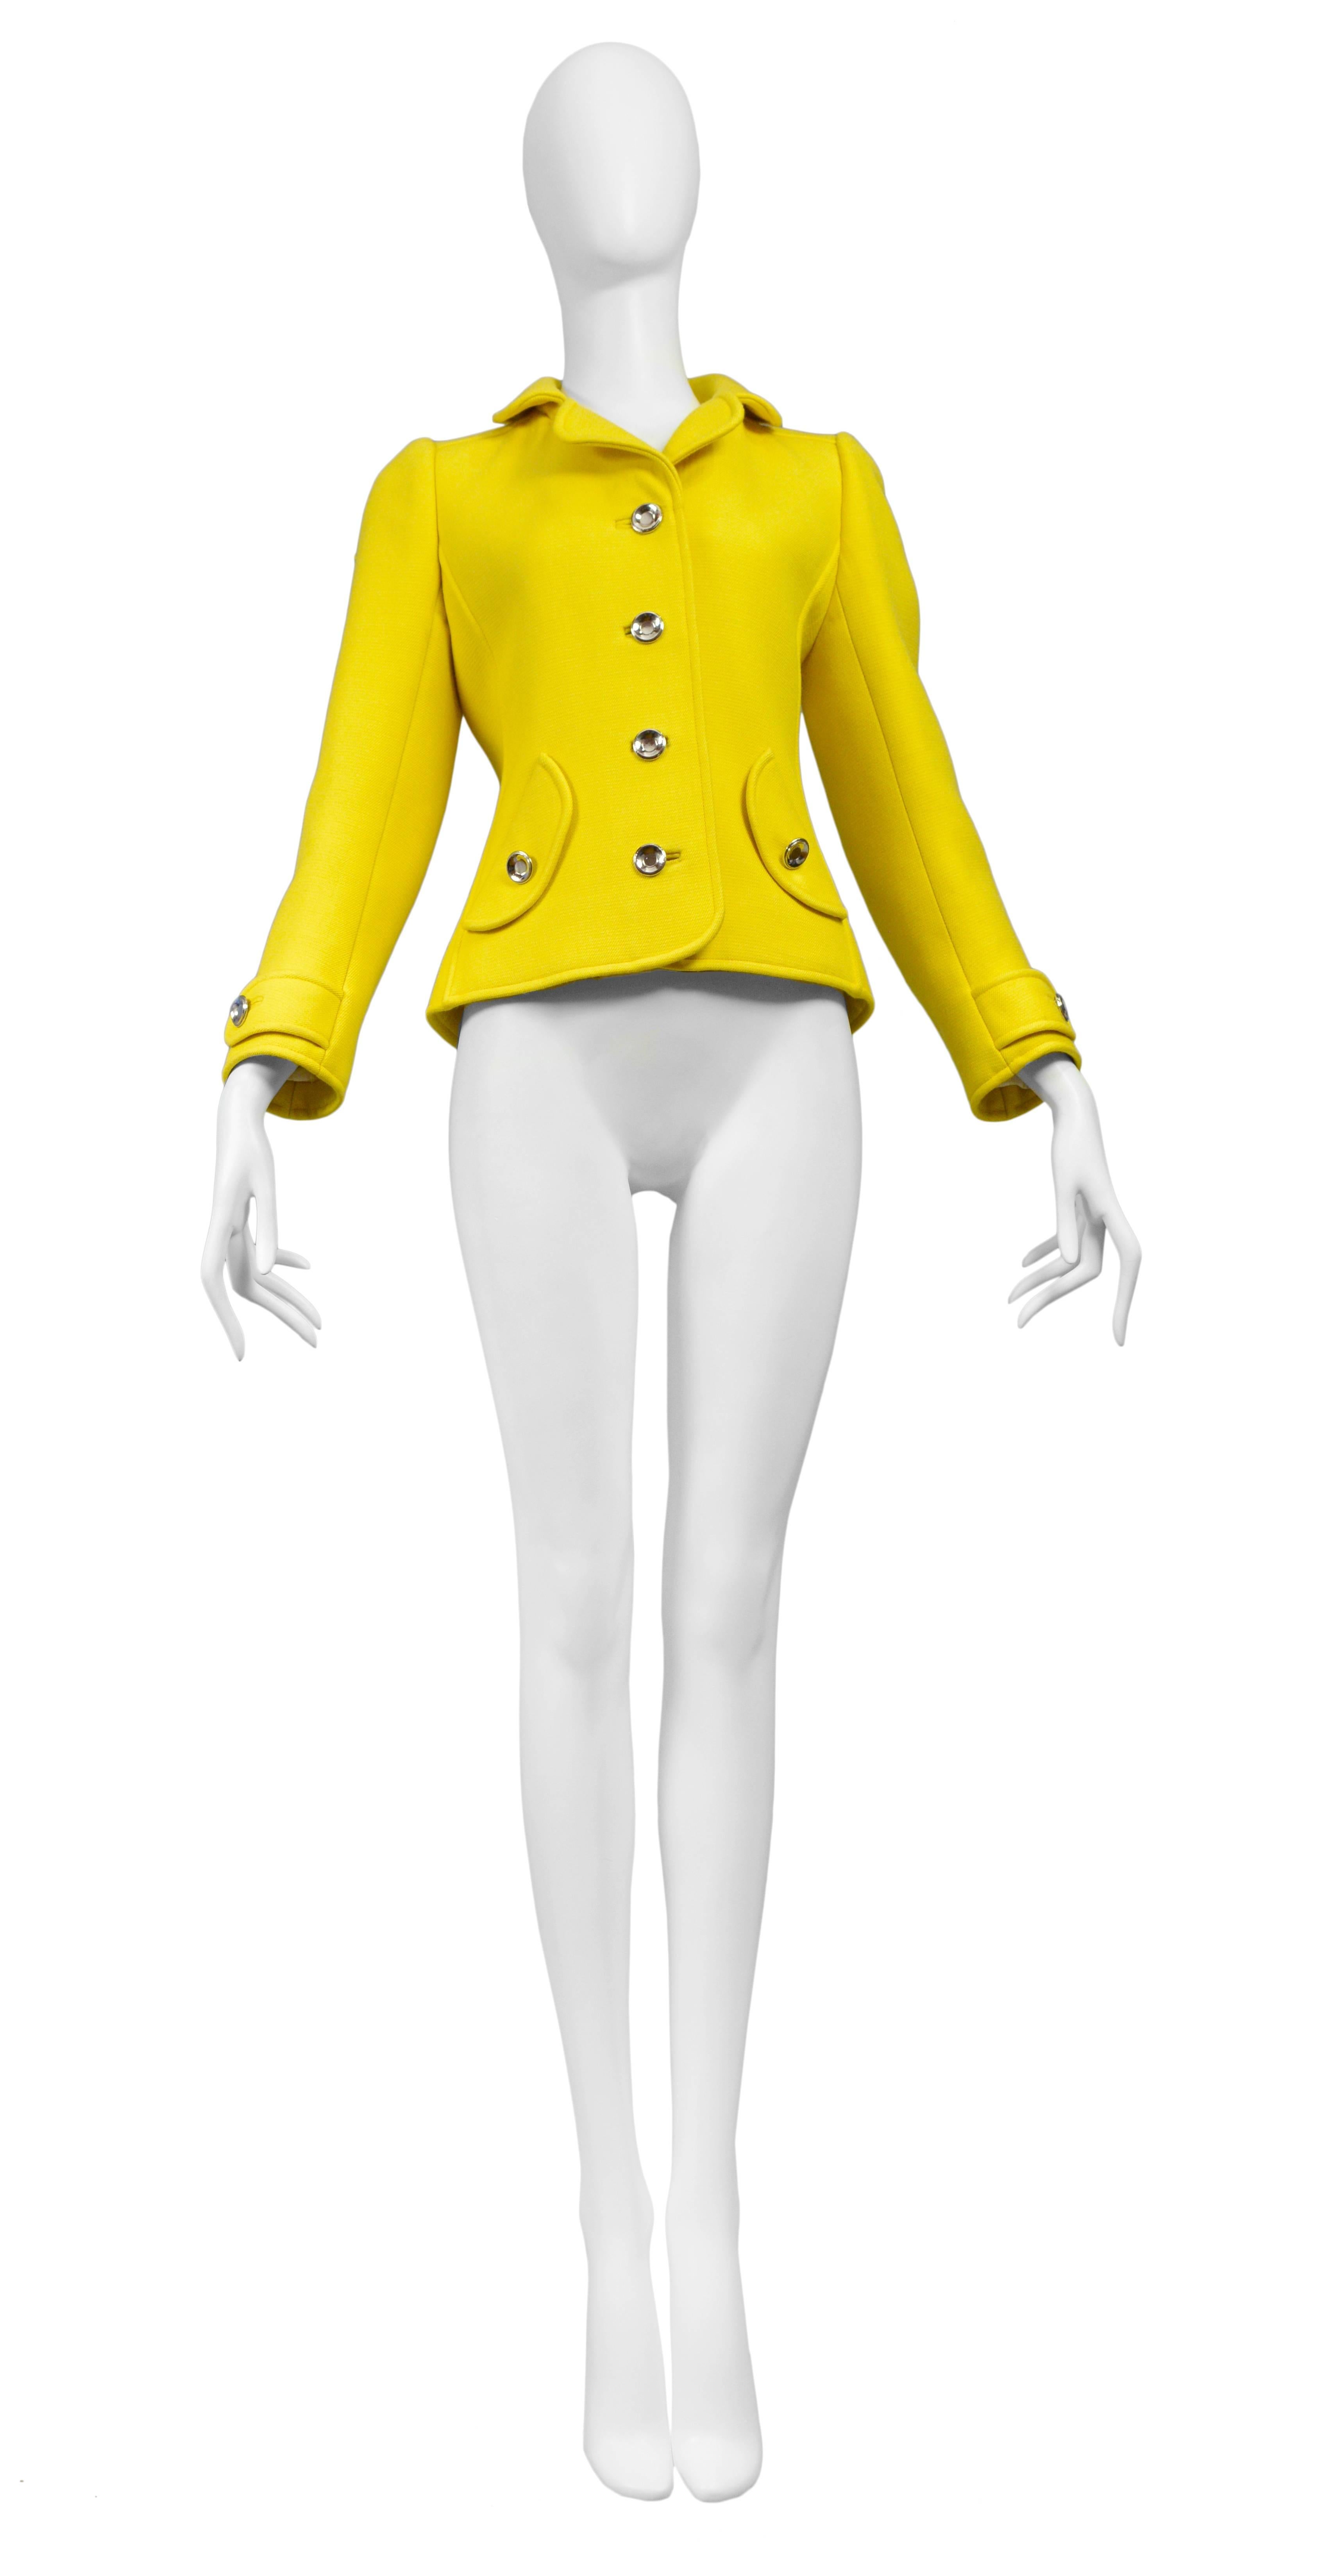 Vintage Courreges yellow jacket featuring a five metal button opening at the front, and two side pockets.
Please inquire for additional images.